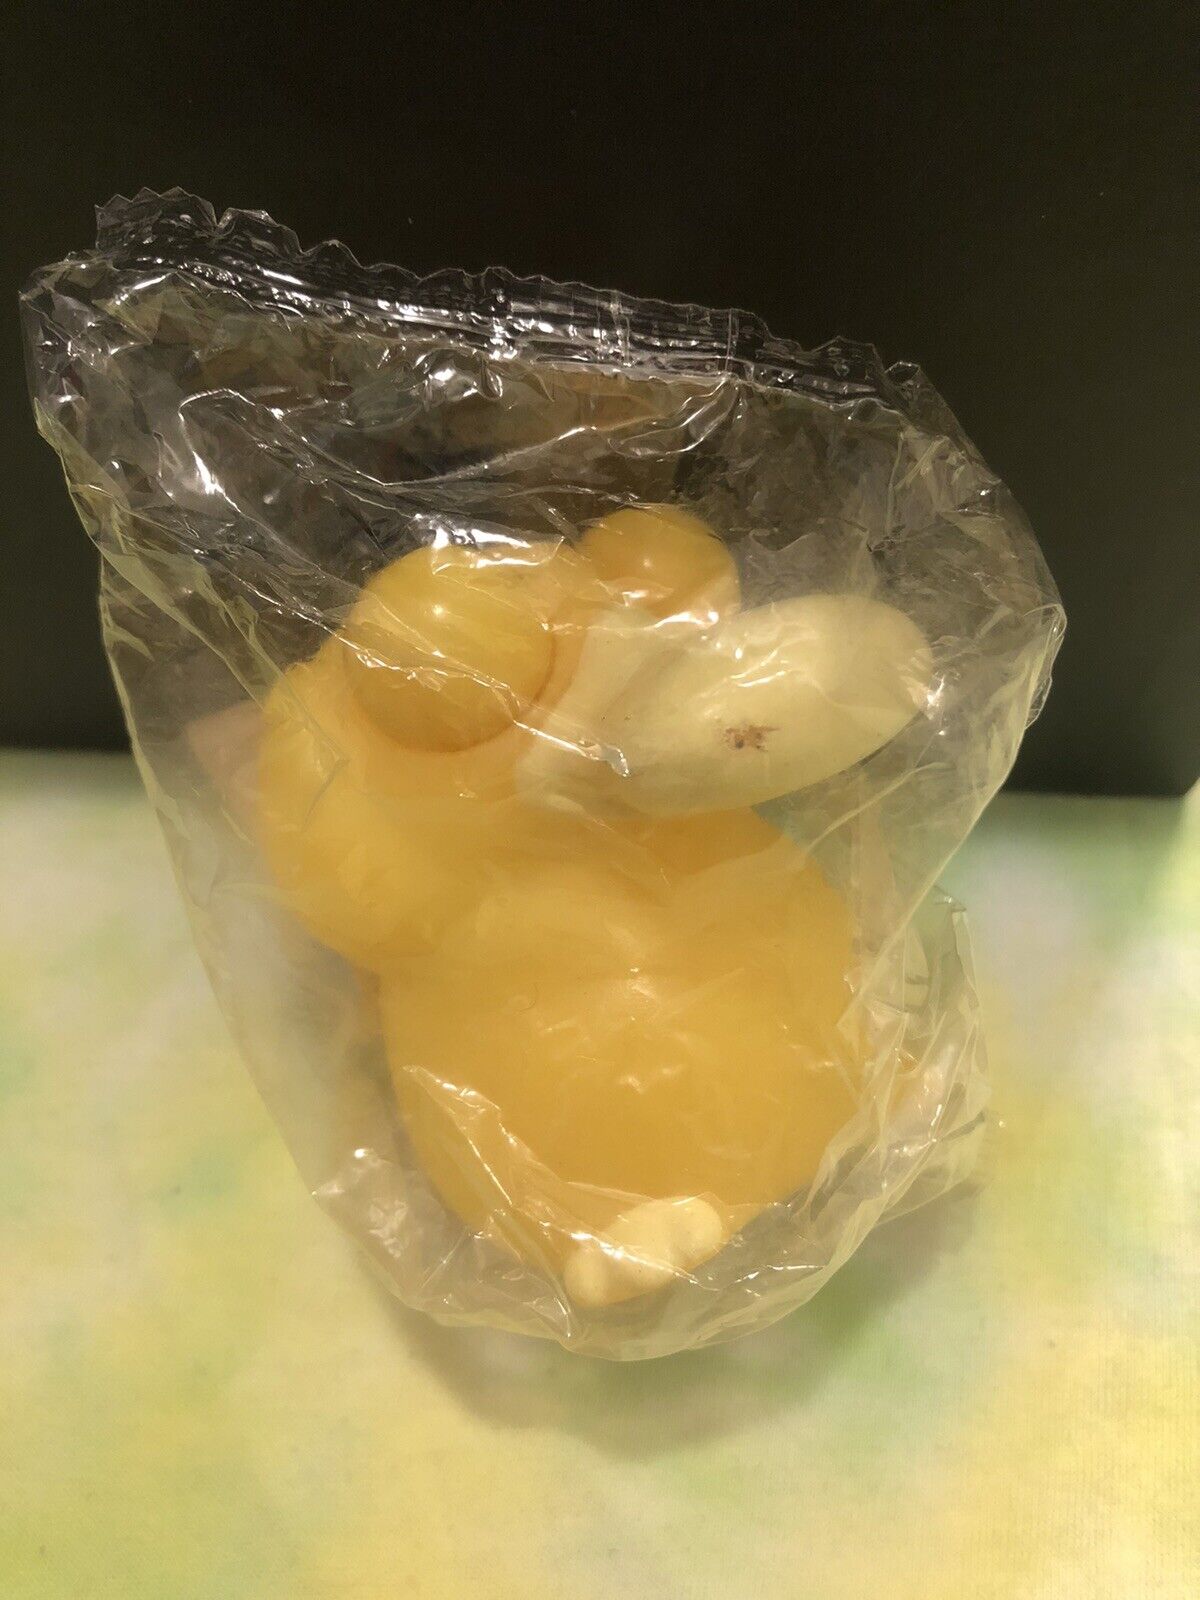 Pokémon Psyduck Squishy / Stress Toy (New In Pack)